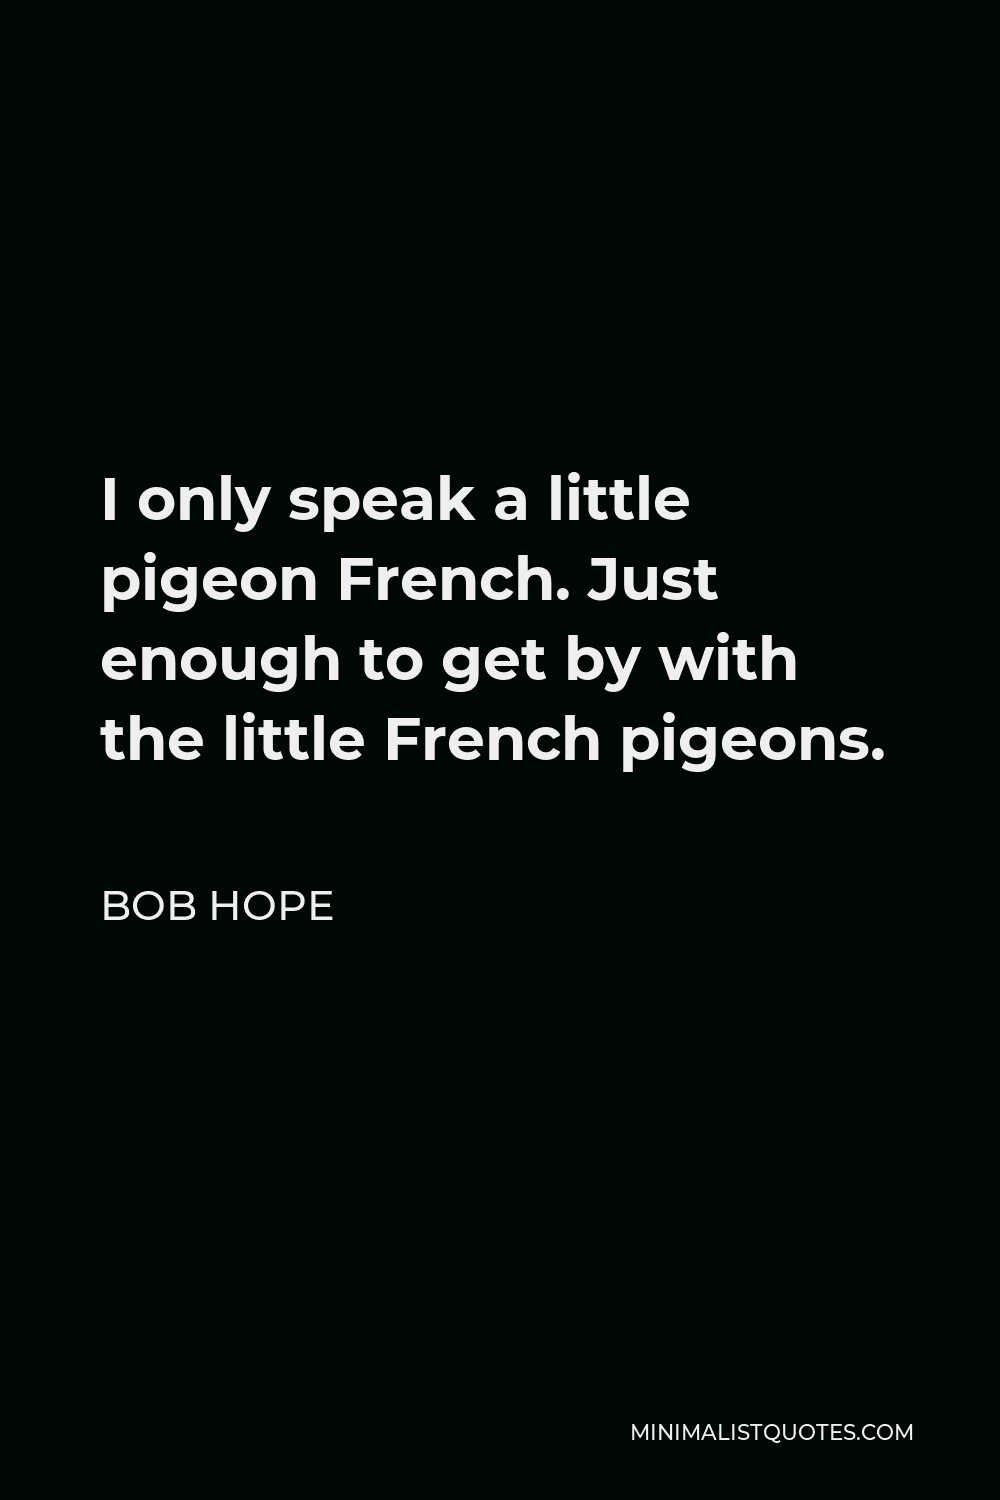 Bob Hope Quote - I only speak a little pigeon French. Just enough to get by with the little French pigeons.